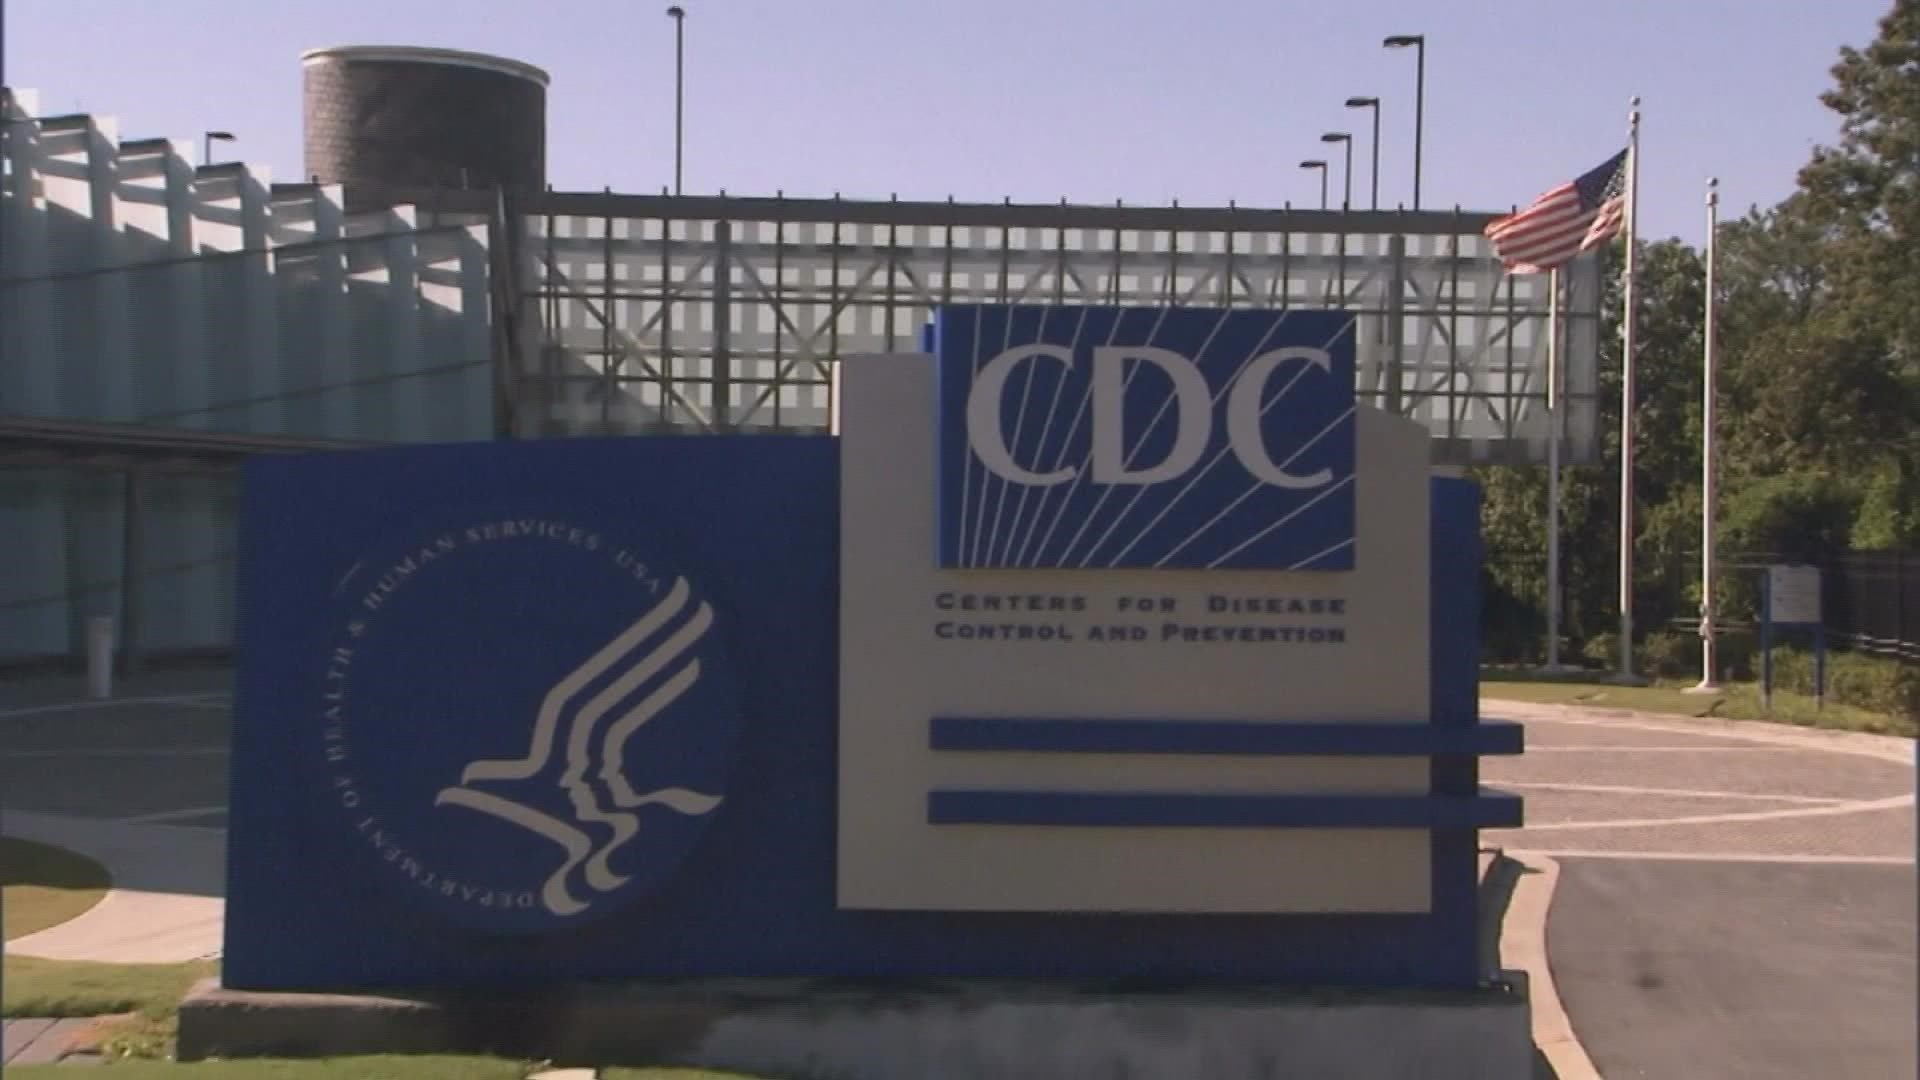 CDC director Dr. Rochelle Walensky said the agency had prepared for 75 years for something like this, but that the "performance did not reliably meet expectations."